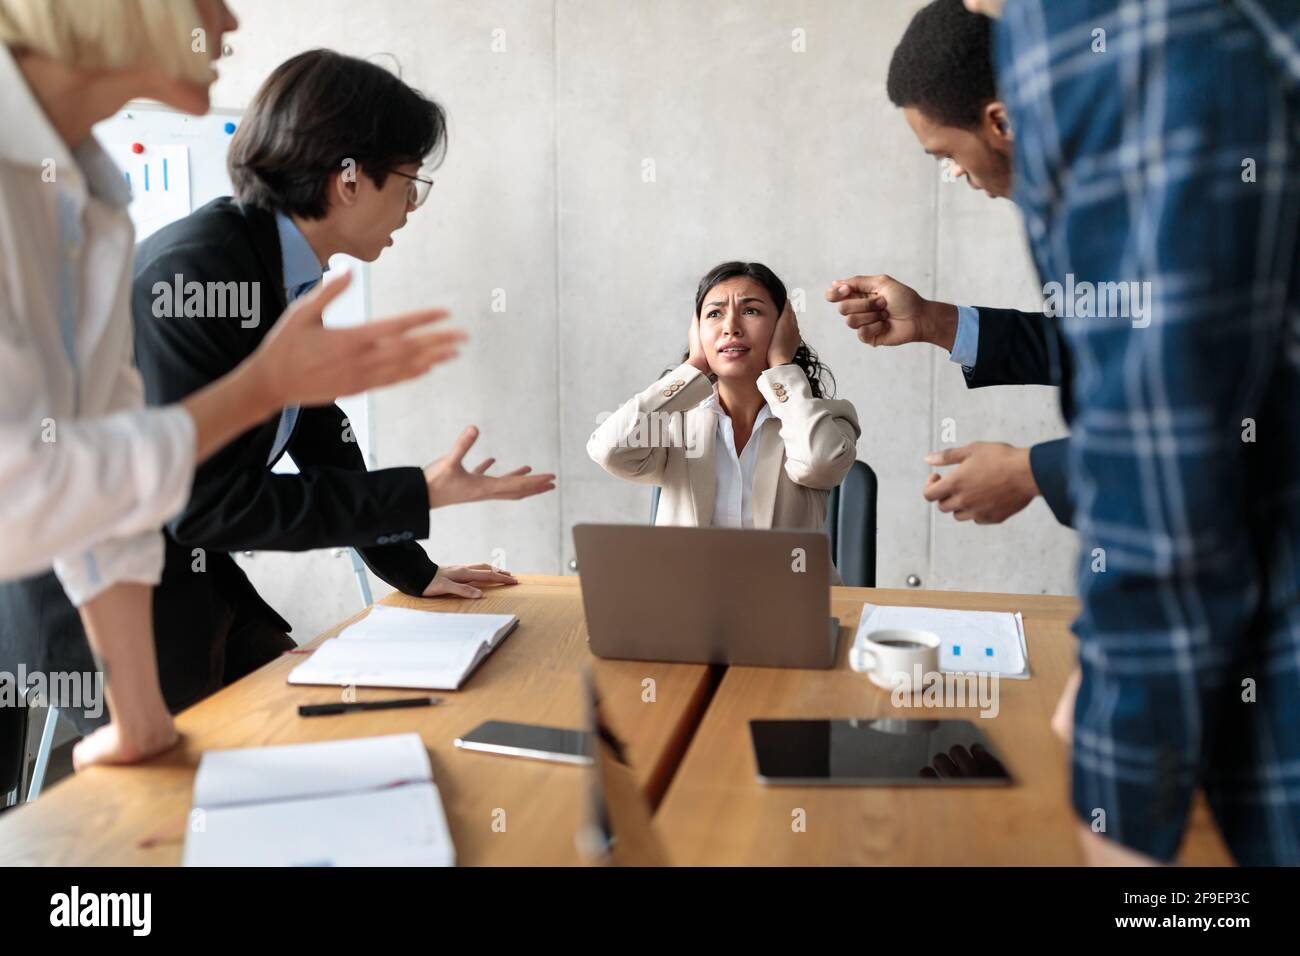 Aggressive Coworkers Shouting Criticizing Unhappy Victimized Female Worker In Office Stock Photo